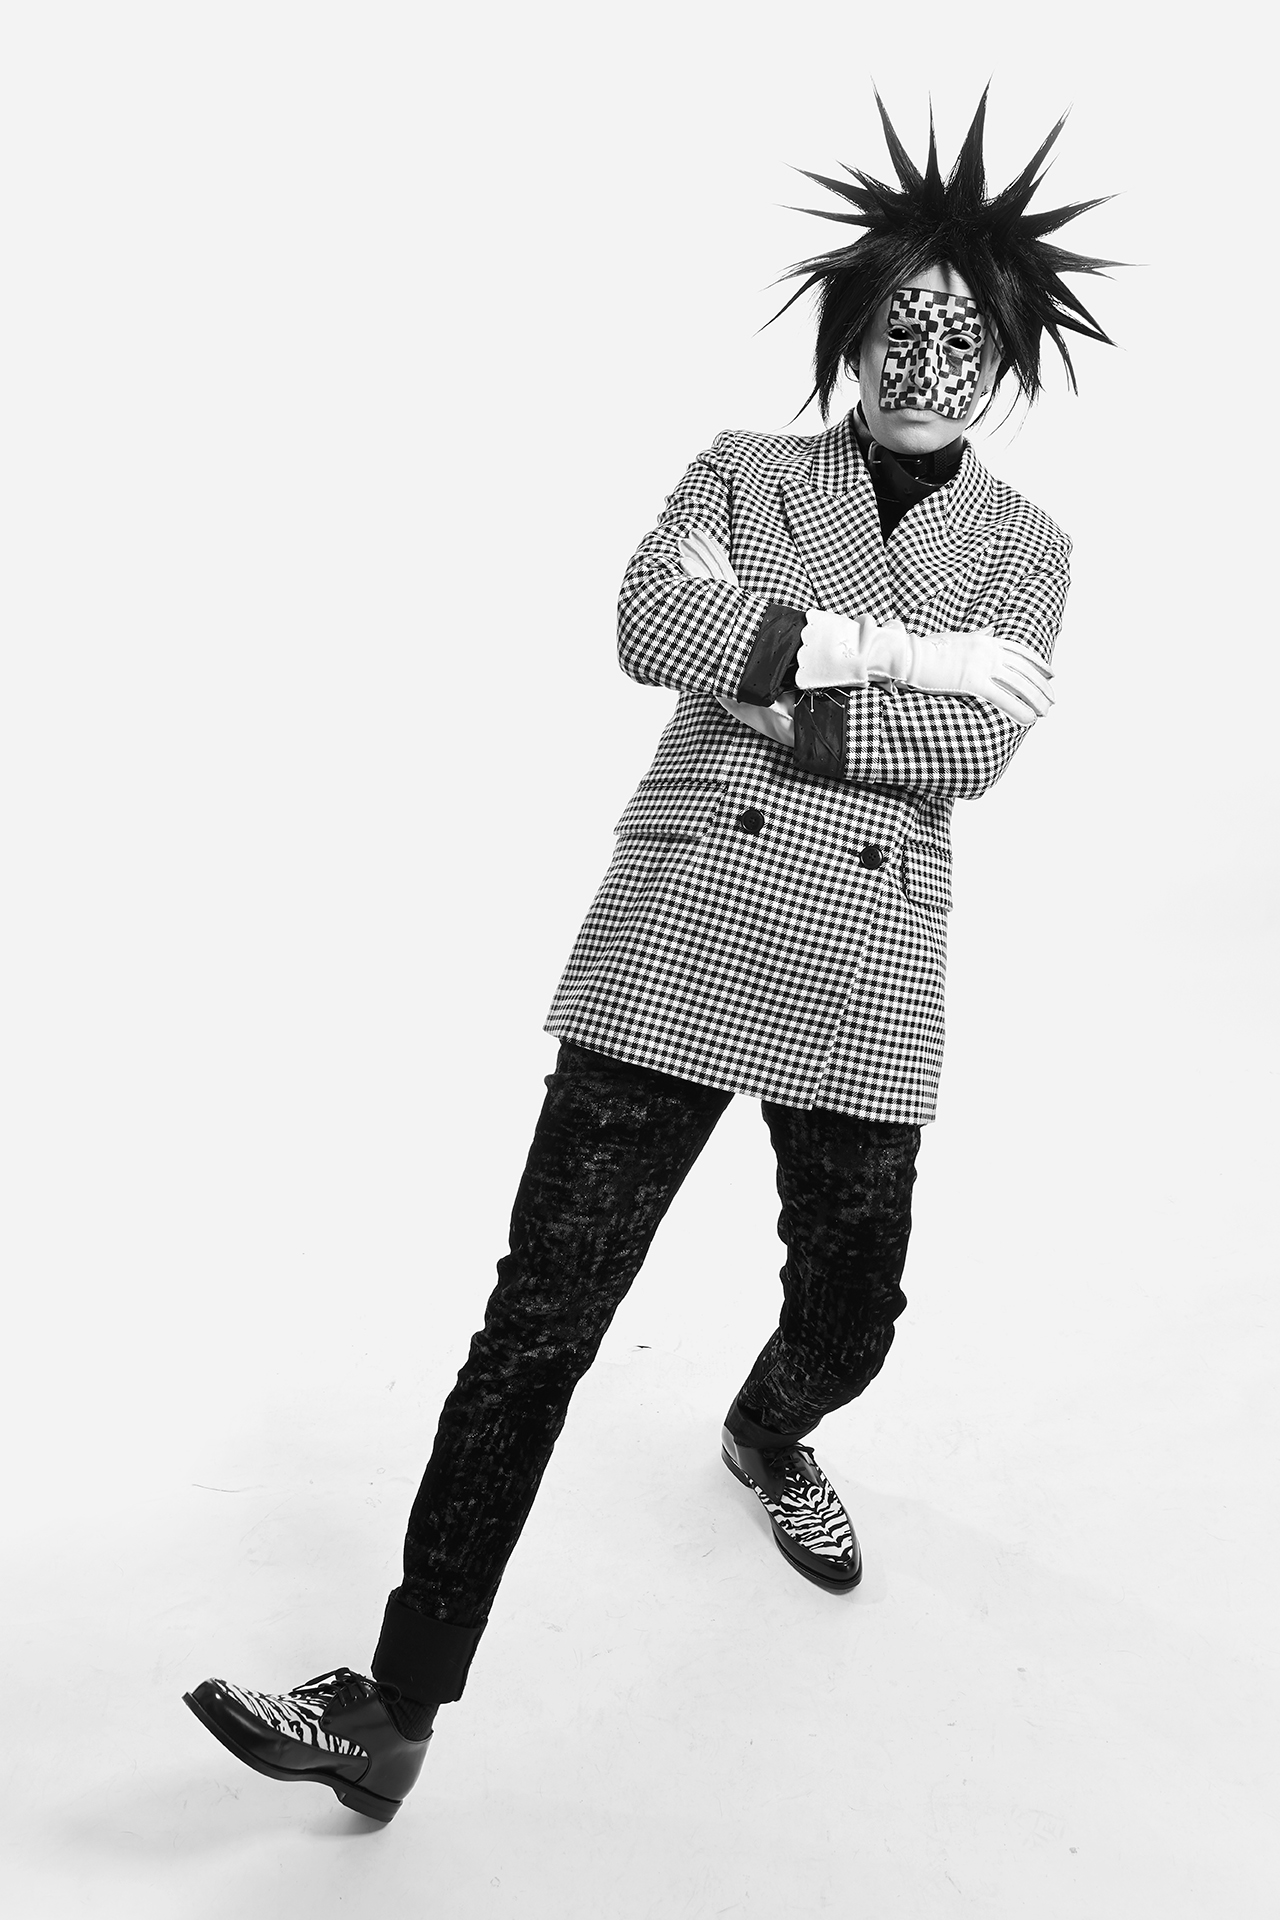 Jesse leaning backwards with checkered facepaint, spiked black hair and a checkered blazer on a white background